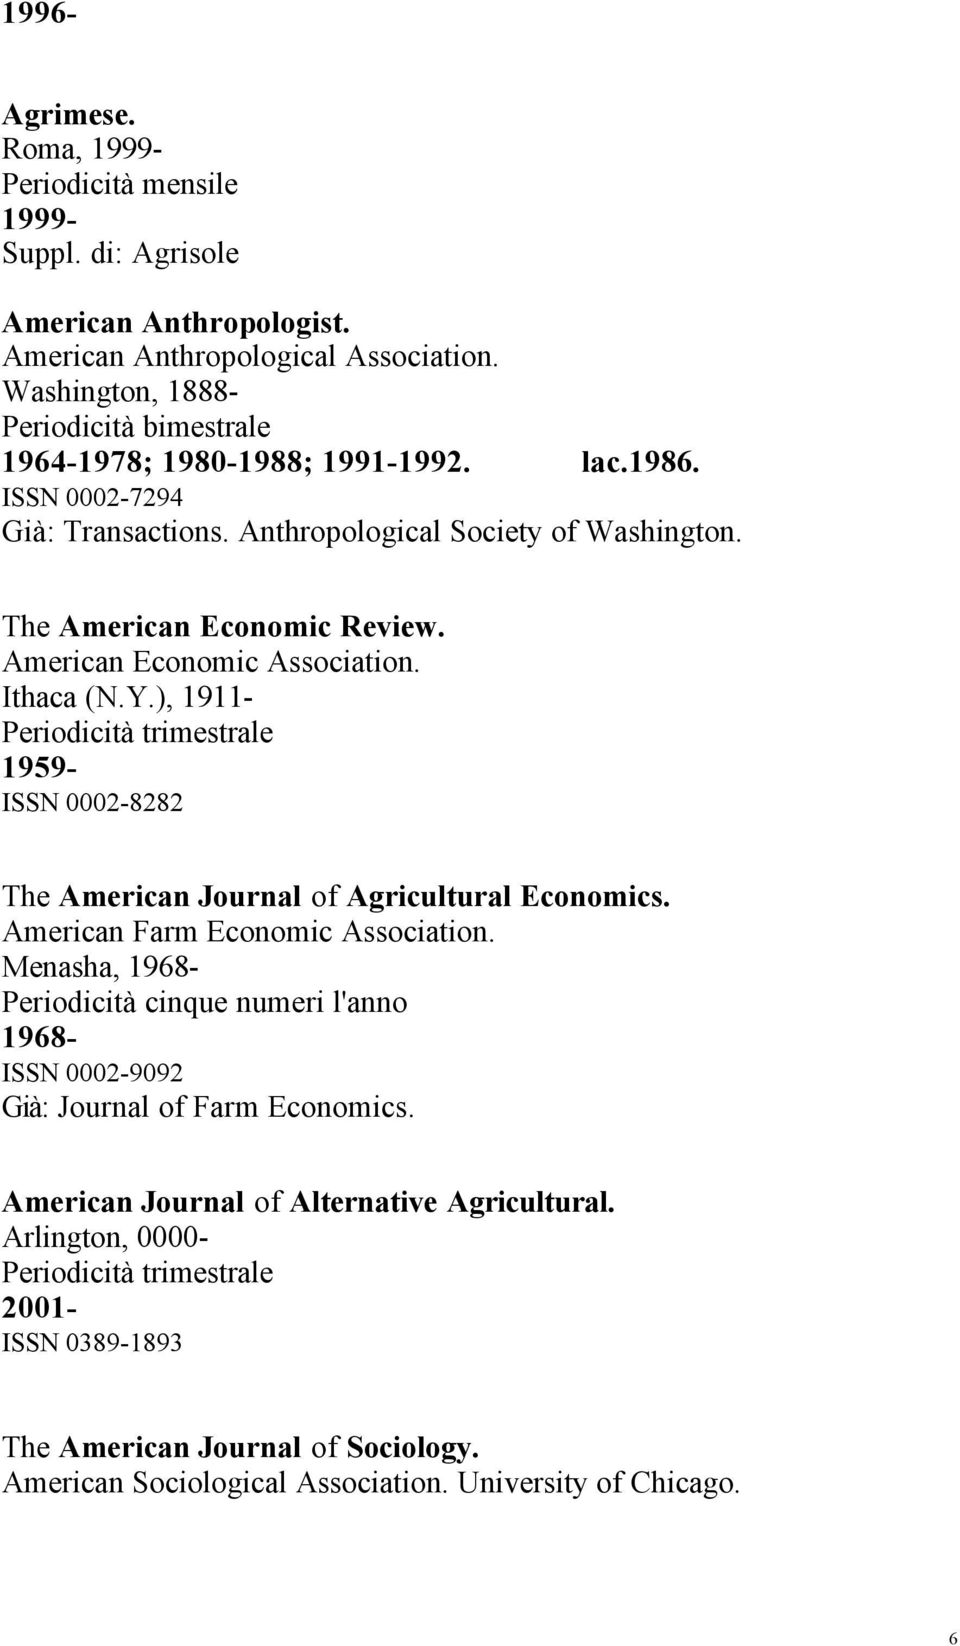 The American Economic Review. American Economic Association. Ithaca (N.Y.), 1911-1959- ISSN 0002-8282 The American Journal of Agricultural Economics. American Farm Economic Association.